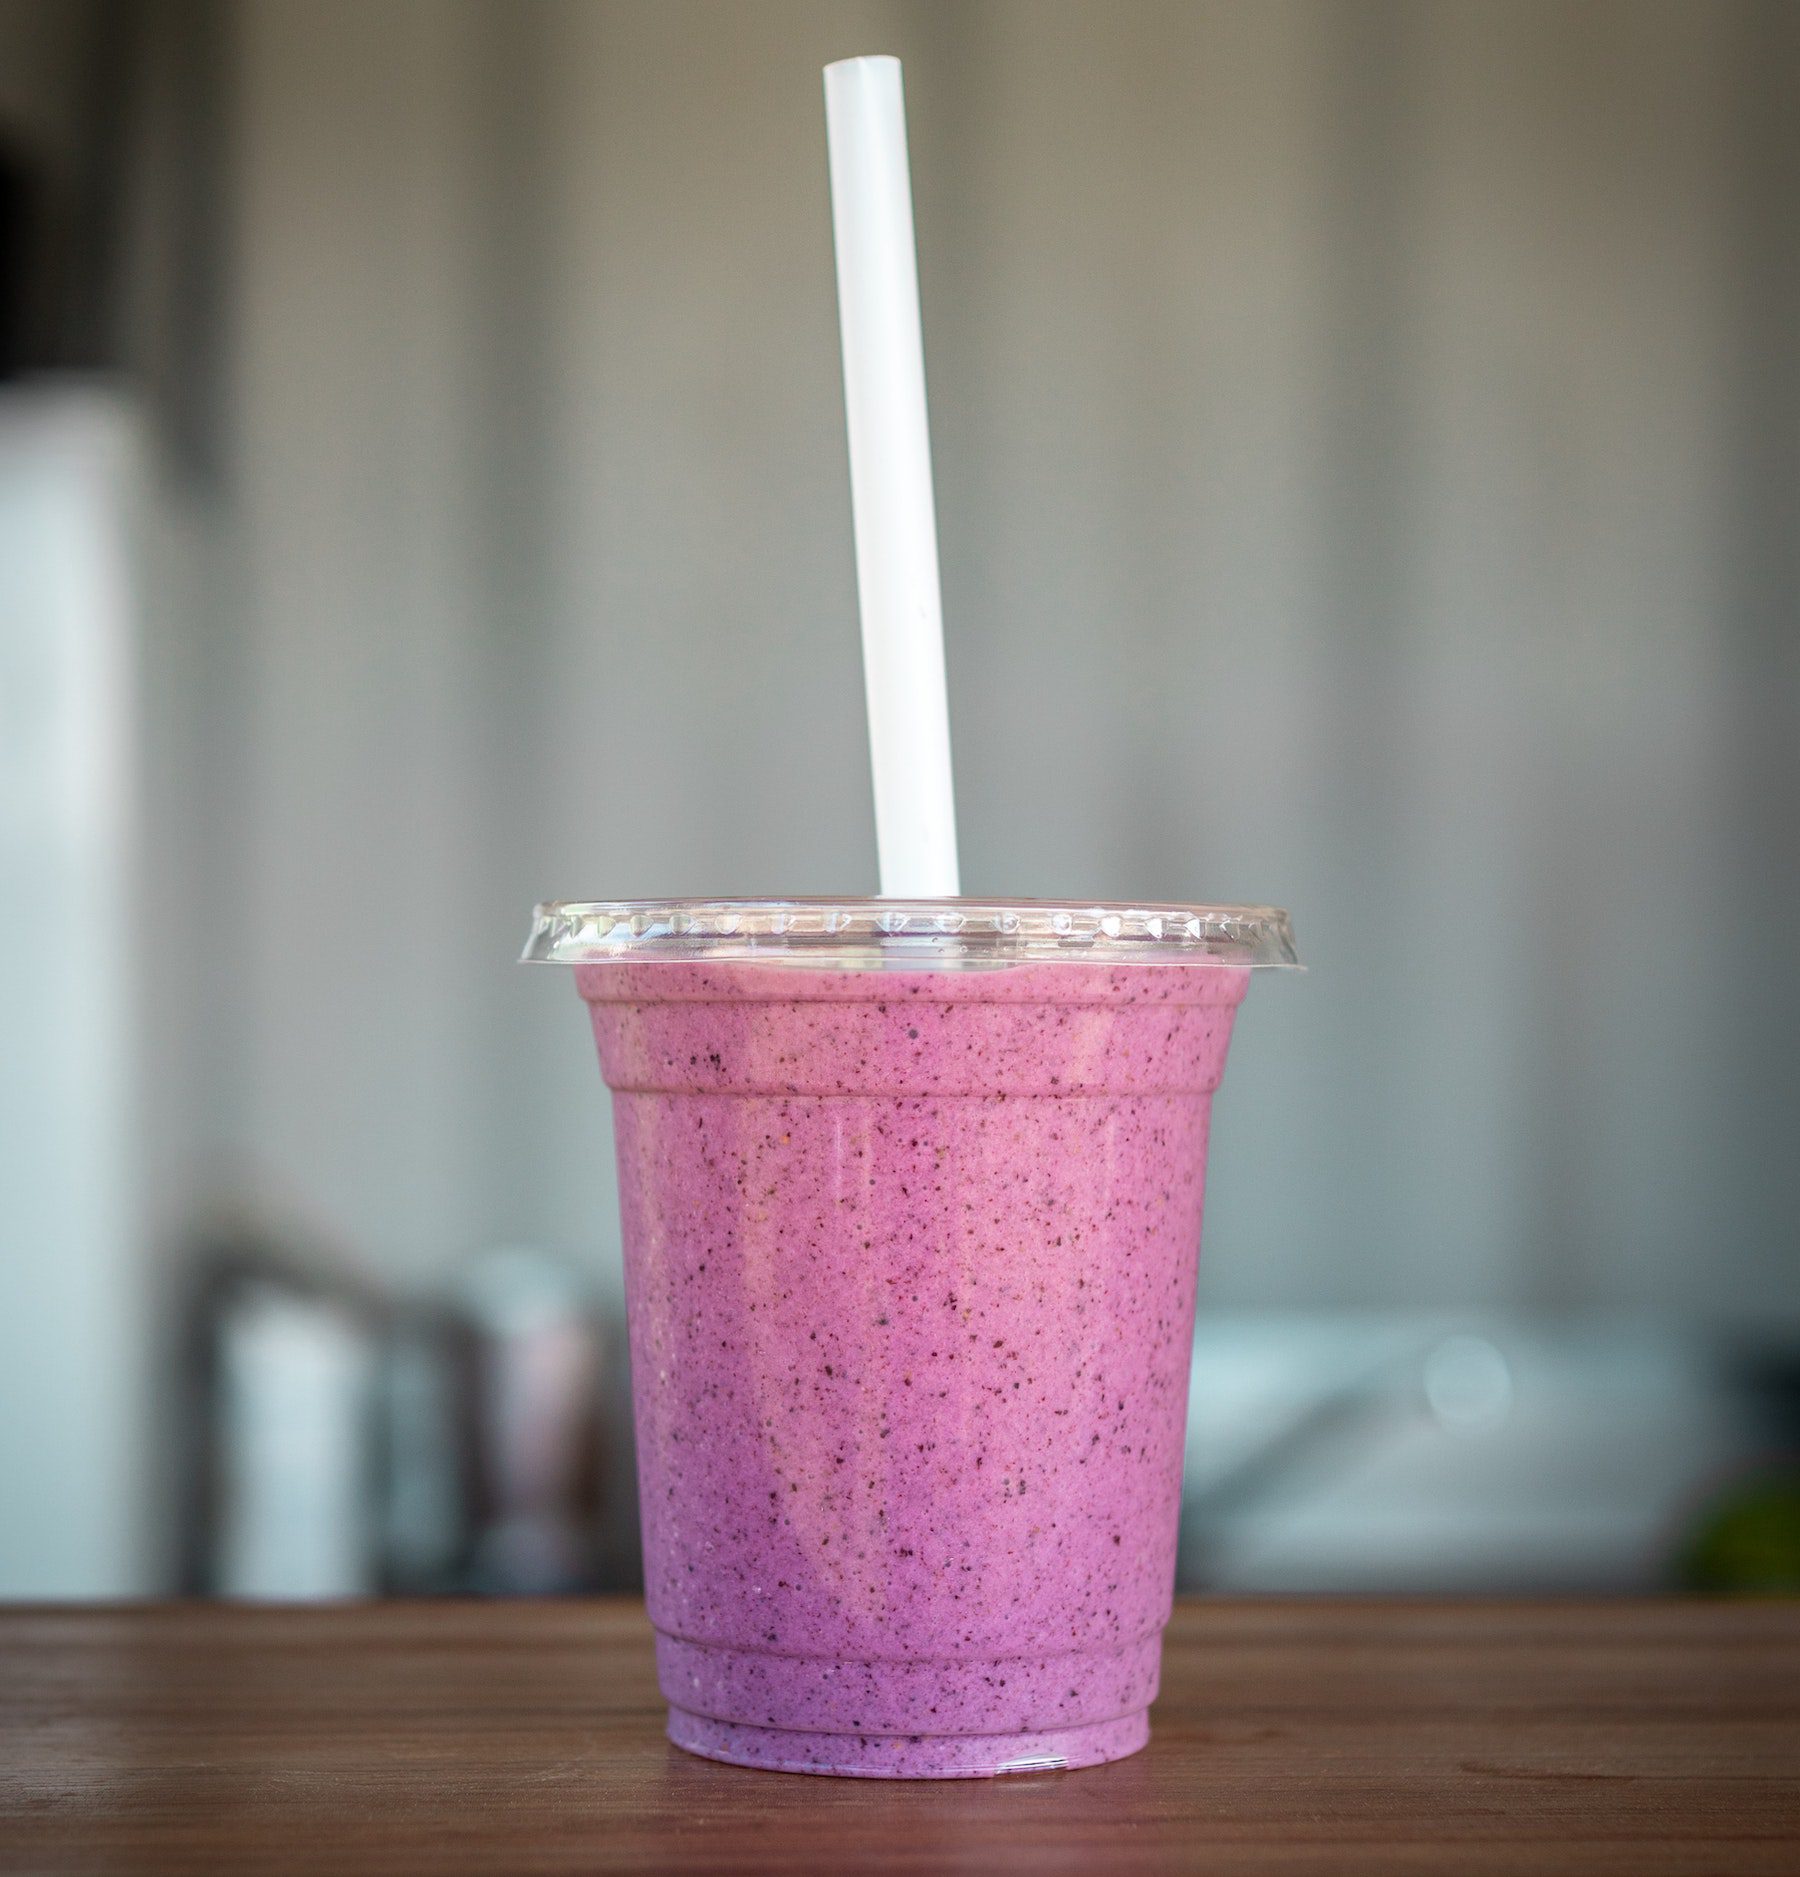 A purple-hued berry fruit smoothie in a clear cup with a tall straw on a wooden counter.